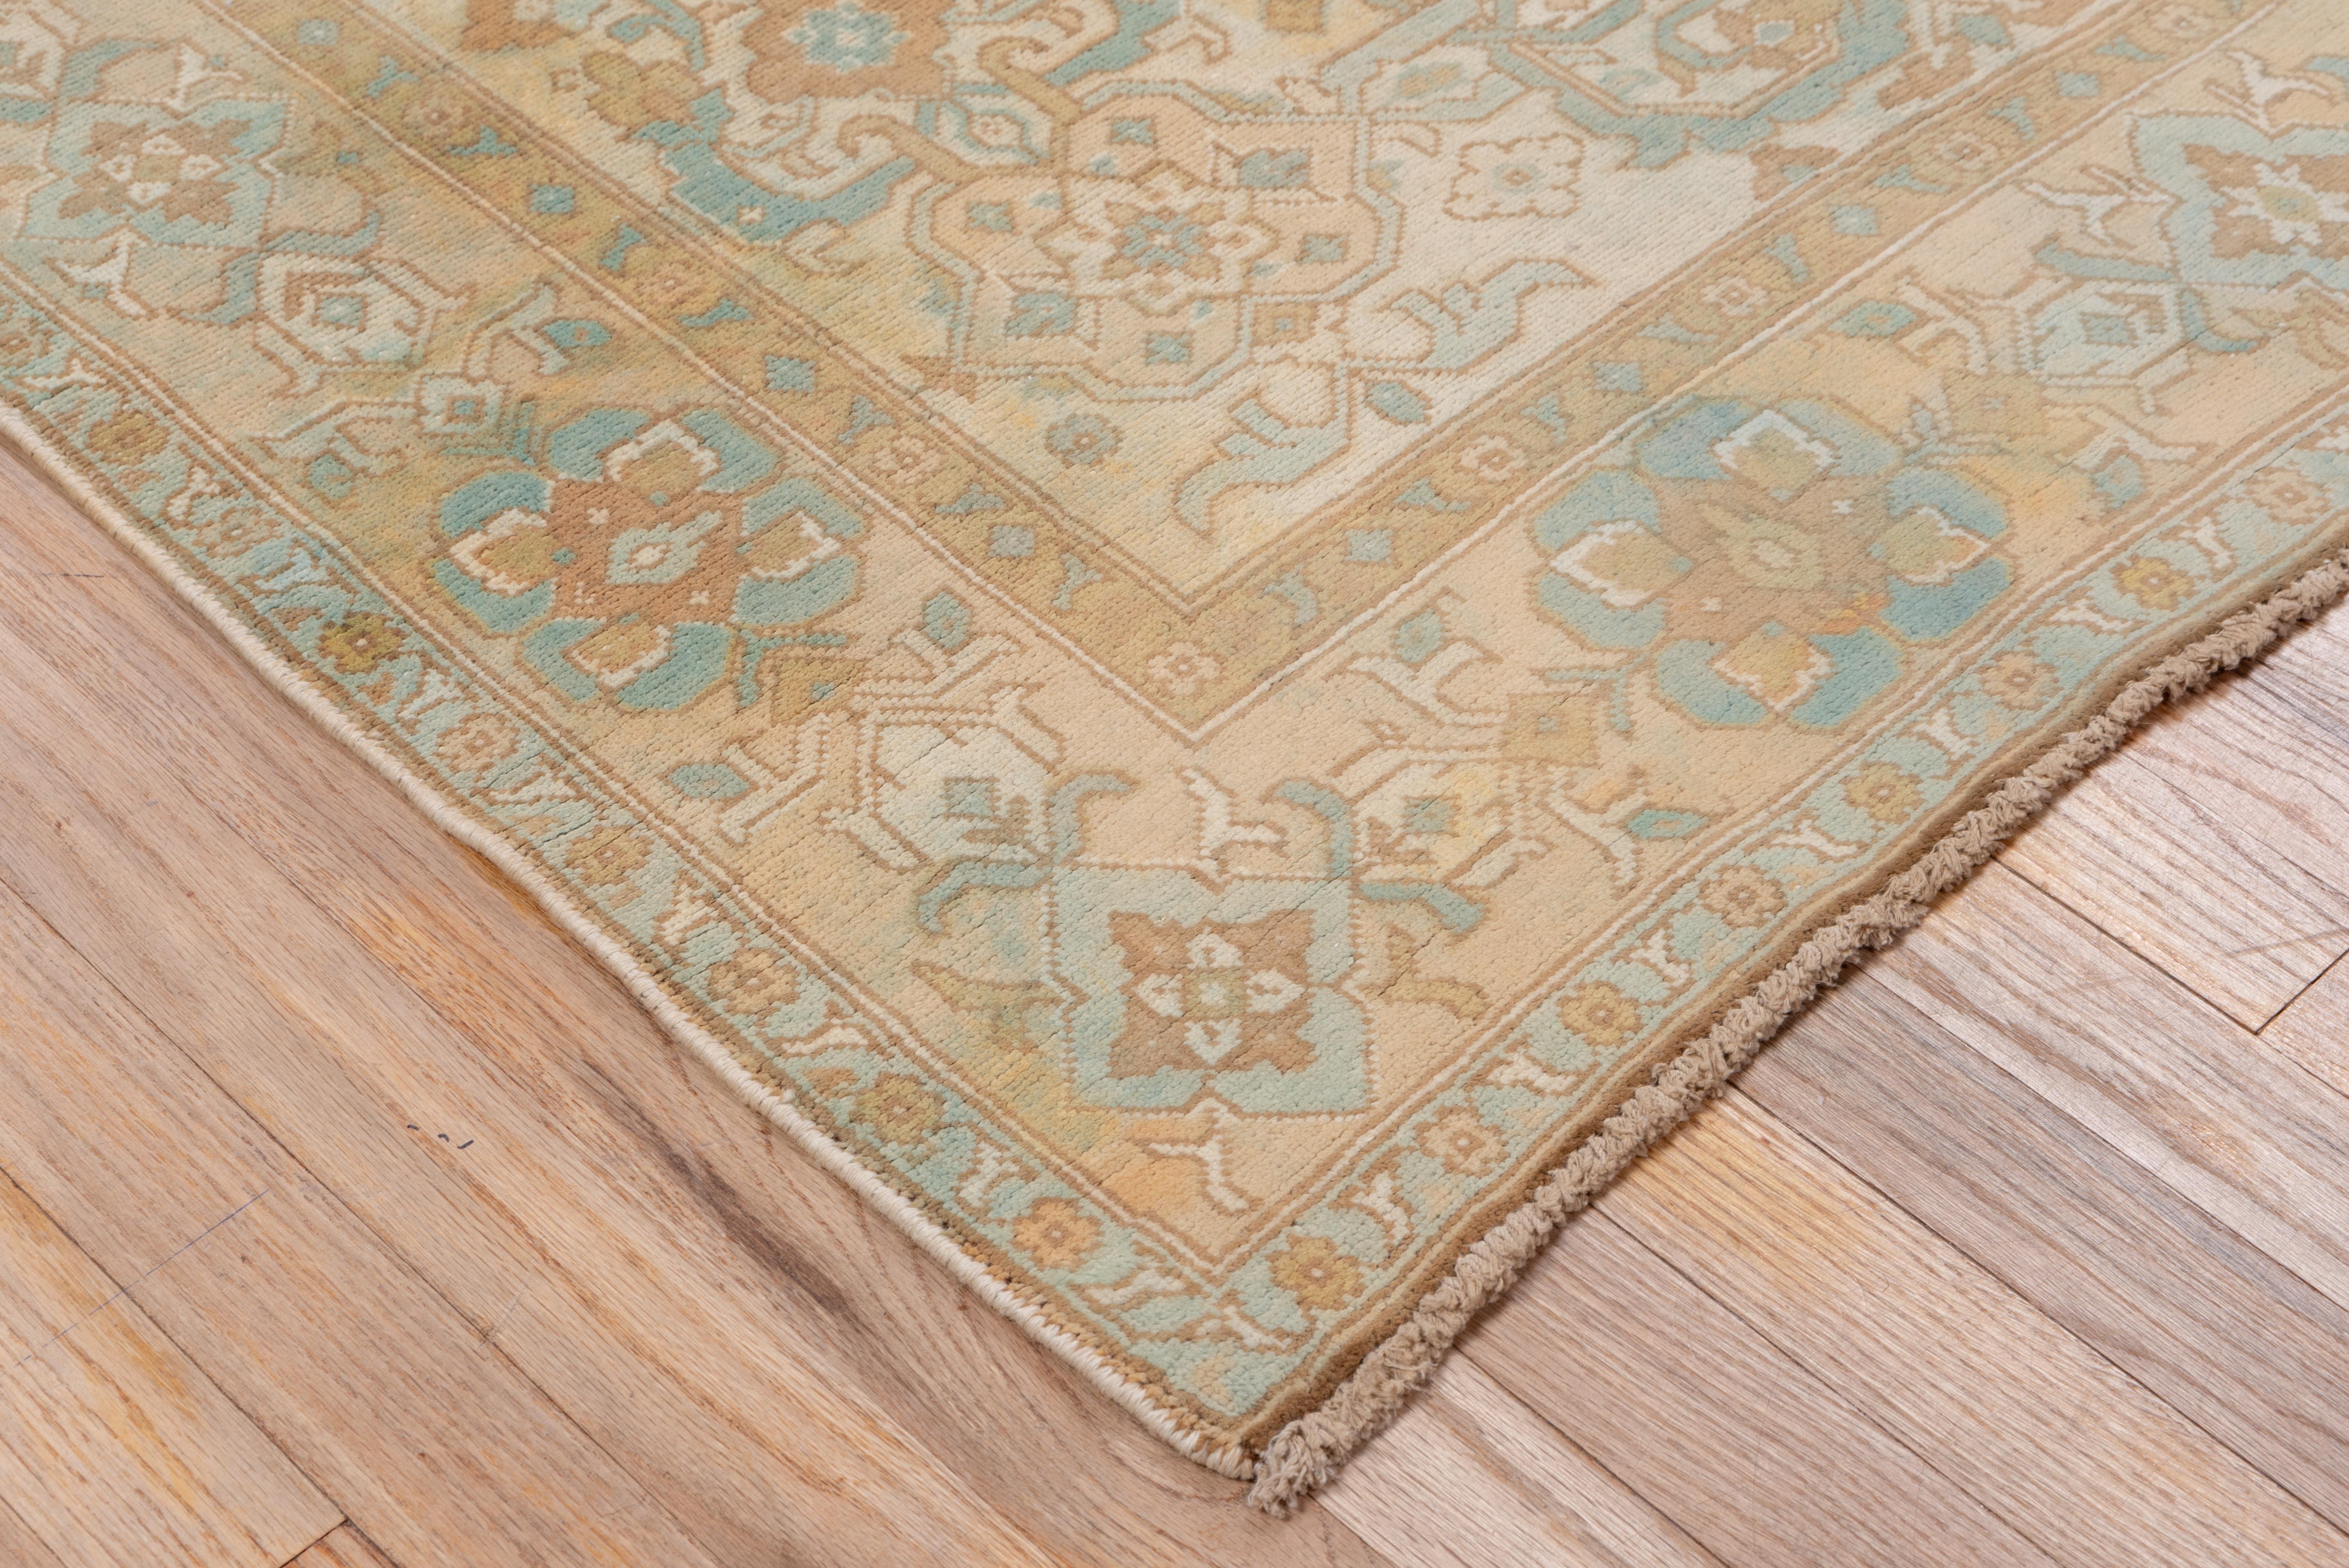 This Turkish East Anatolian town scatter rug has a subtle pattern of semi-geometric leaves around a squarish medallion, on a sand and cream ground. Buff main border with chains of flowers/palmettes. Moderate/medium weave on cotton. Accent colors are